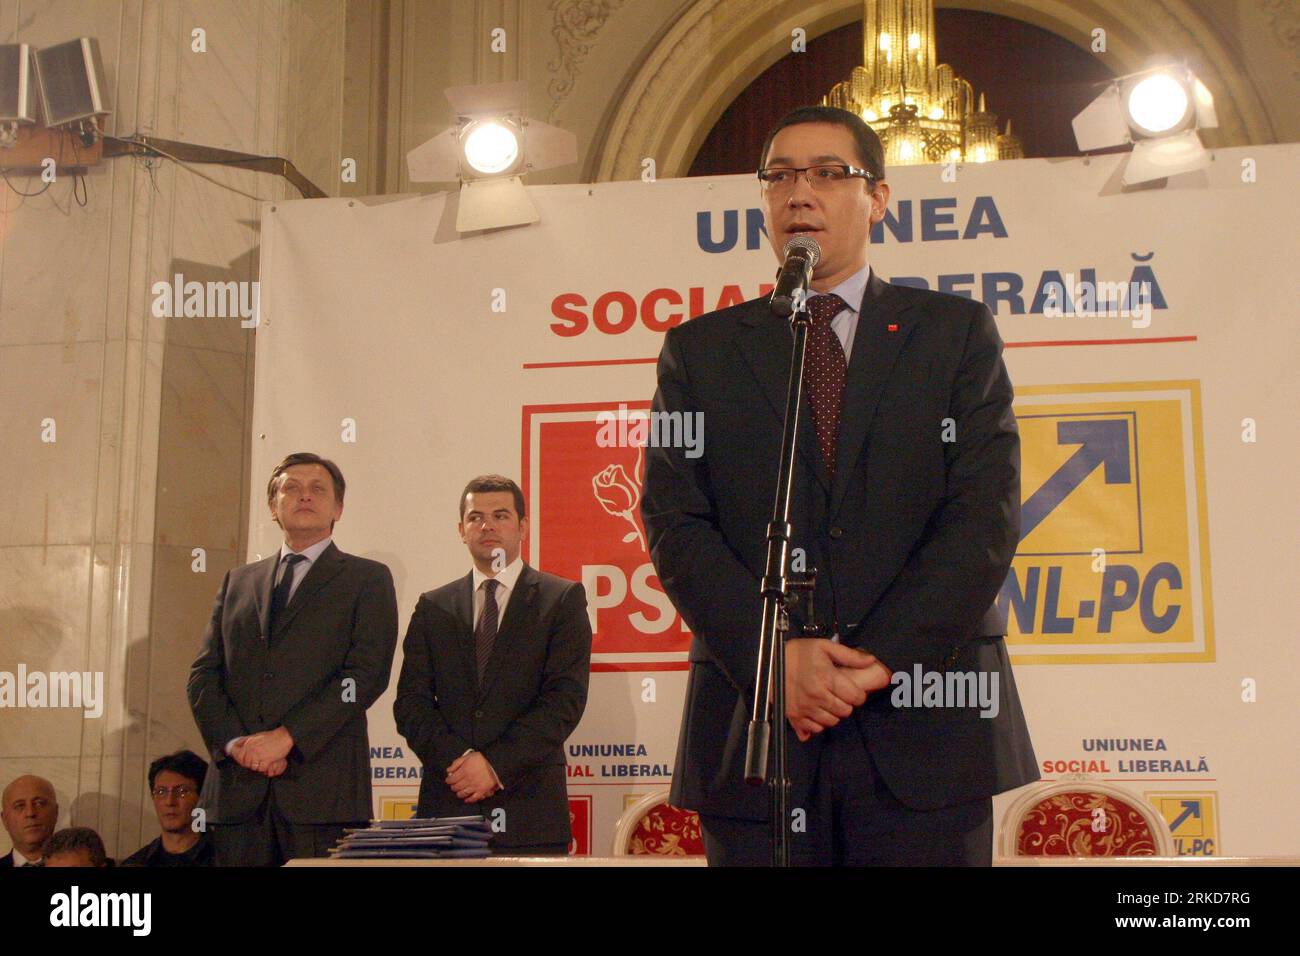 Bildnummer: 54882929  Datum: 05.02.2011  Copyright: imago/Xinhua (110206) -- BUCHAREST, Feb. 6, 2011 (Xinhua) -- President of Social Democrat Party Victor Ponta (R) speaks as President of Conservative Party Daniel Constantinescu (C) and President of National Liberal Party Crin Antonescu stand behind him after signing the document of a new political alliance at Parliament Palace, in Bucharest, capital of Romania, Feb. 5, 2011. (Xinhua/Gabriel Petrescu) (ypf) ROMANIA-POLITICS-ALLIANCE PUBLICATIONxNOTxINxCHN People Politik kbdig xmk xo0x 2011 quer     Bildnummer 54882929 Date 05 02 2011 Copyright Stock Photo